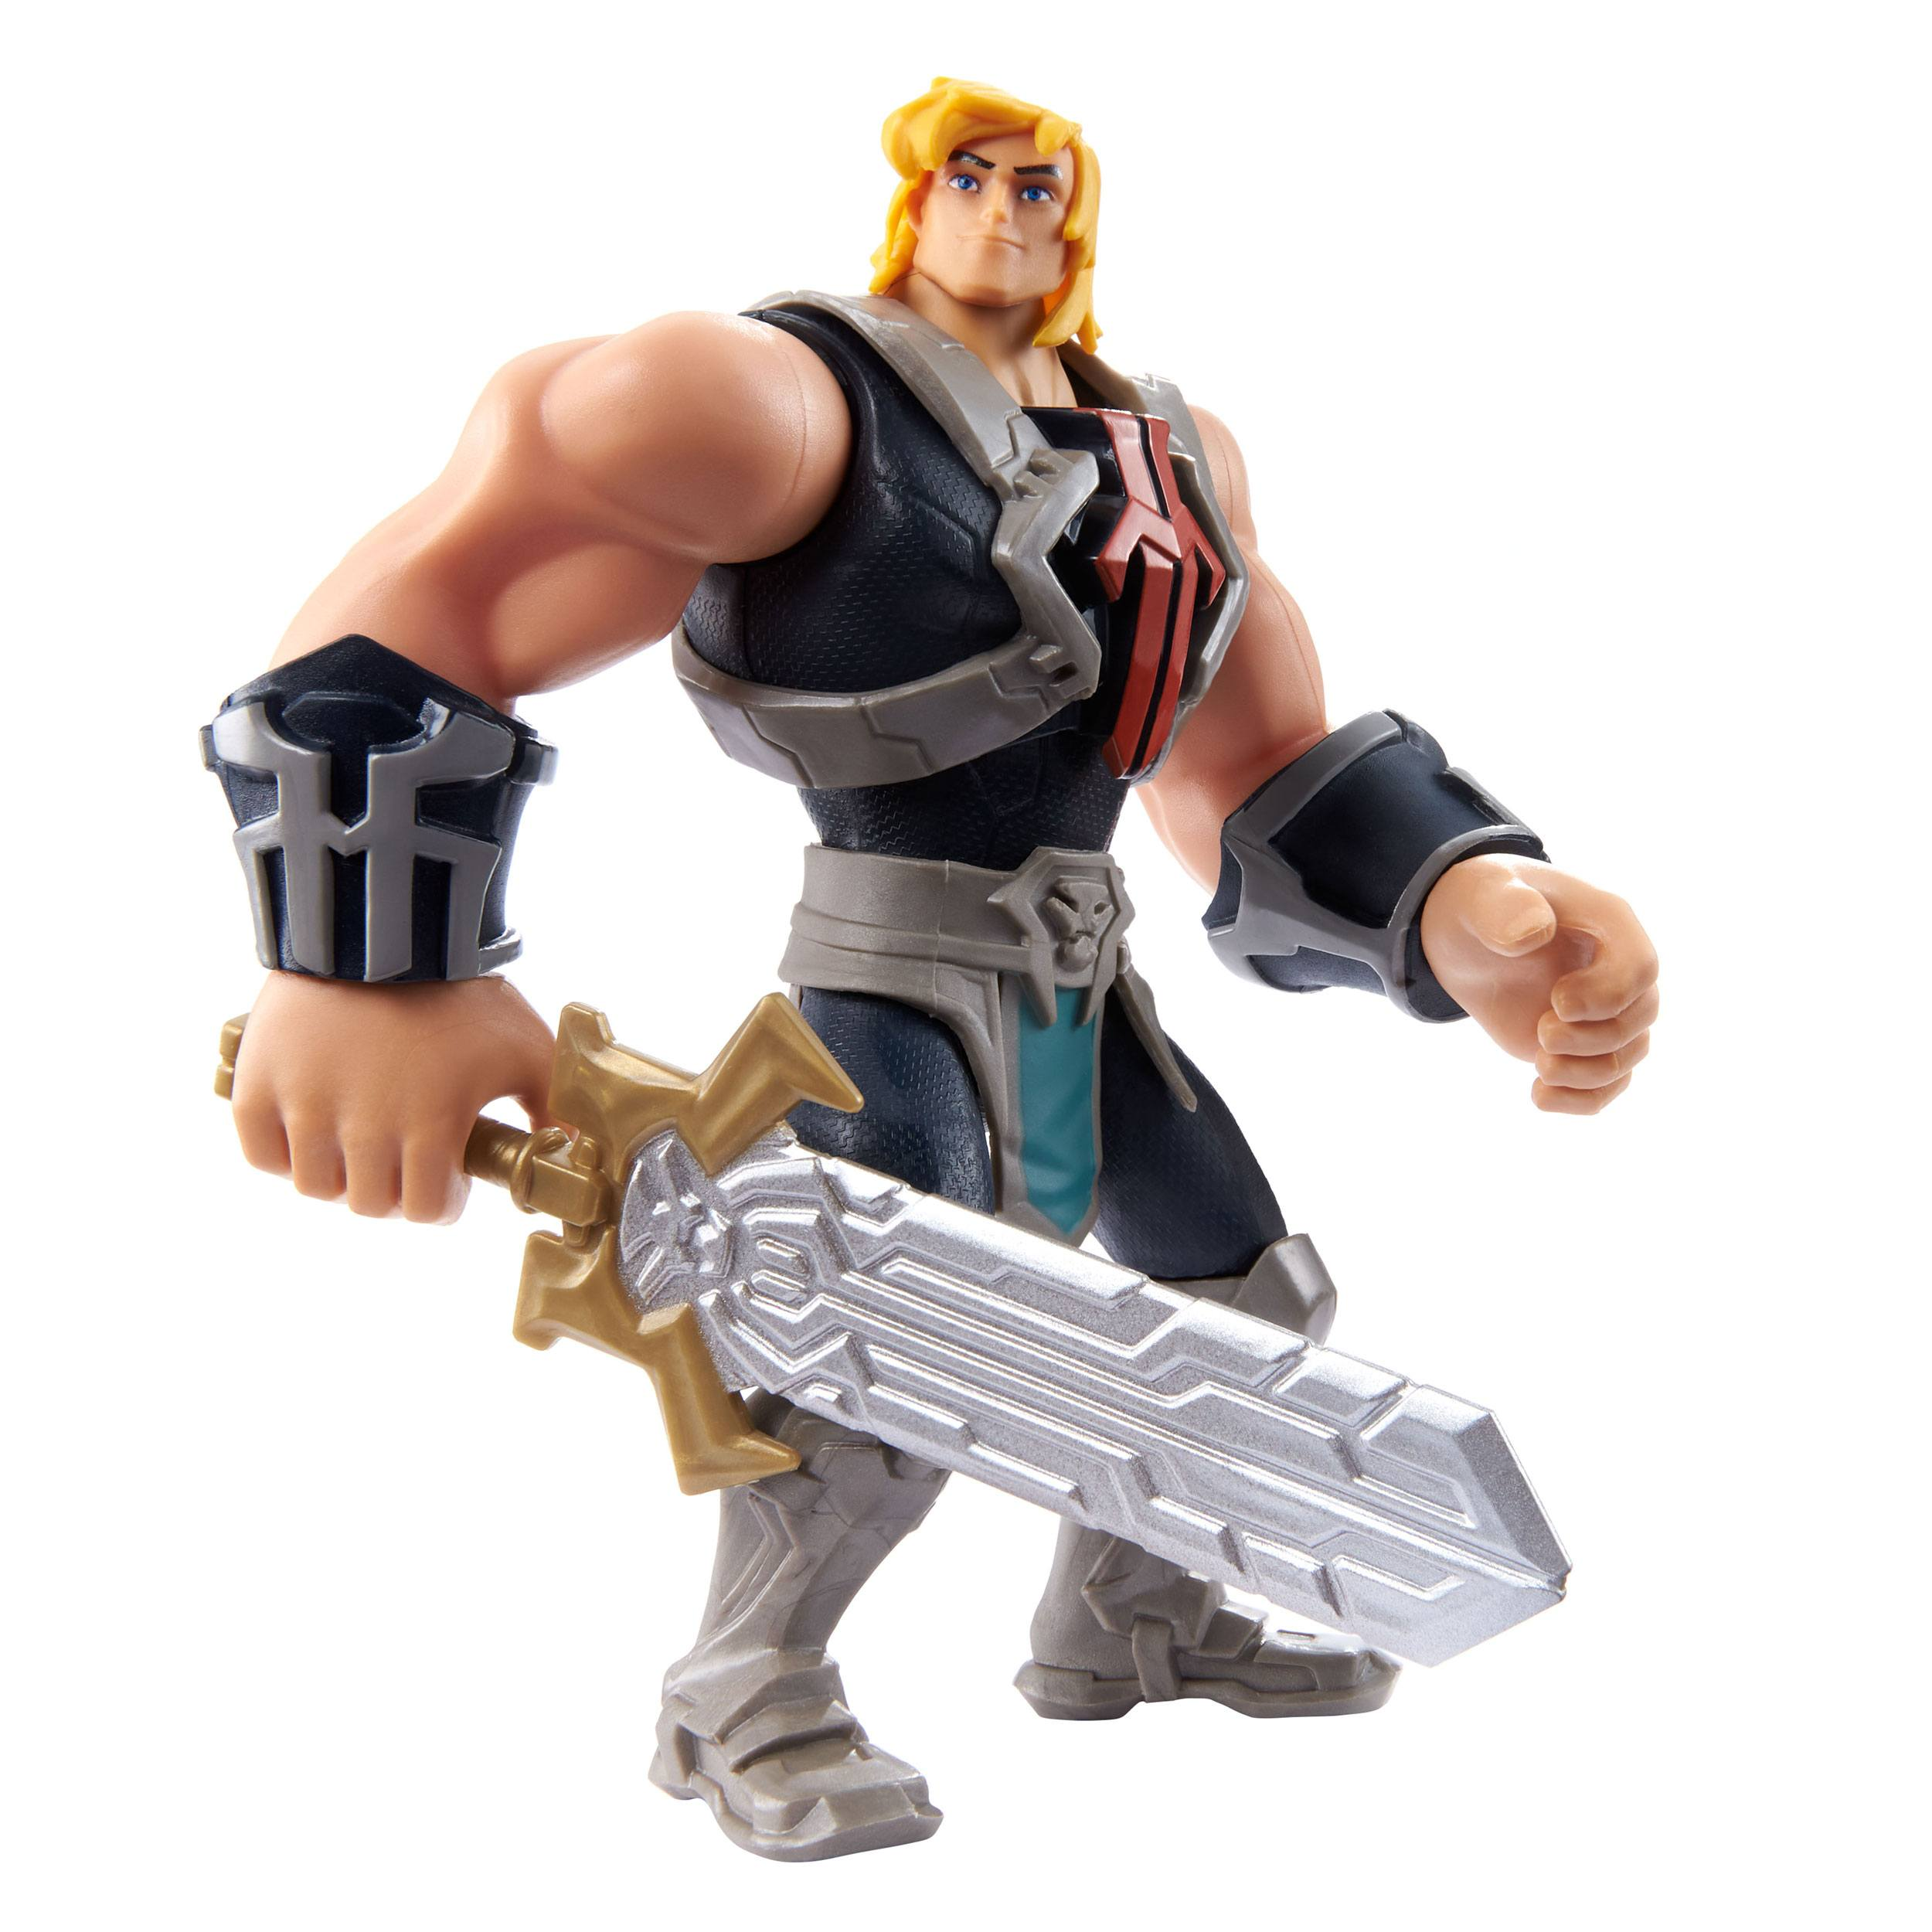 MATTEL He-Man and Action Masters The Universe He-Man cm Of Actionfigur 14 The Figur